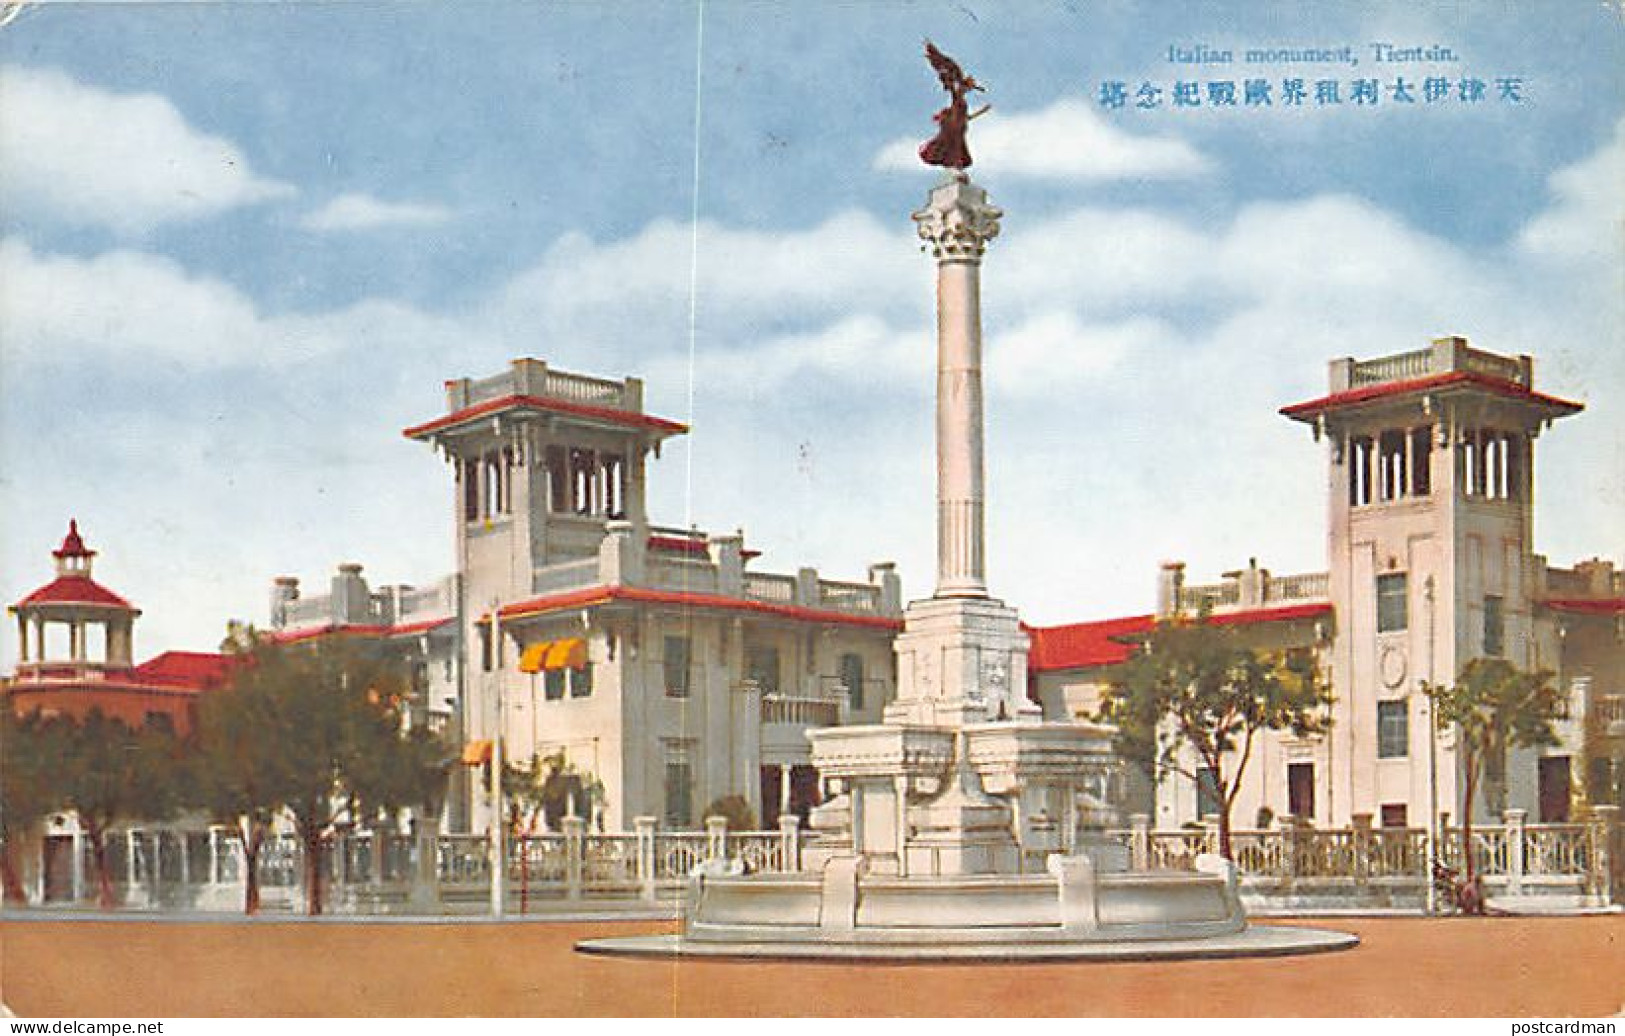 China - TIENTSIN - The Italian Monument - Publ. Unknown  - China